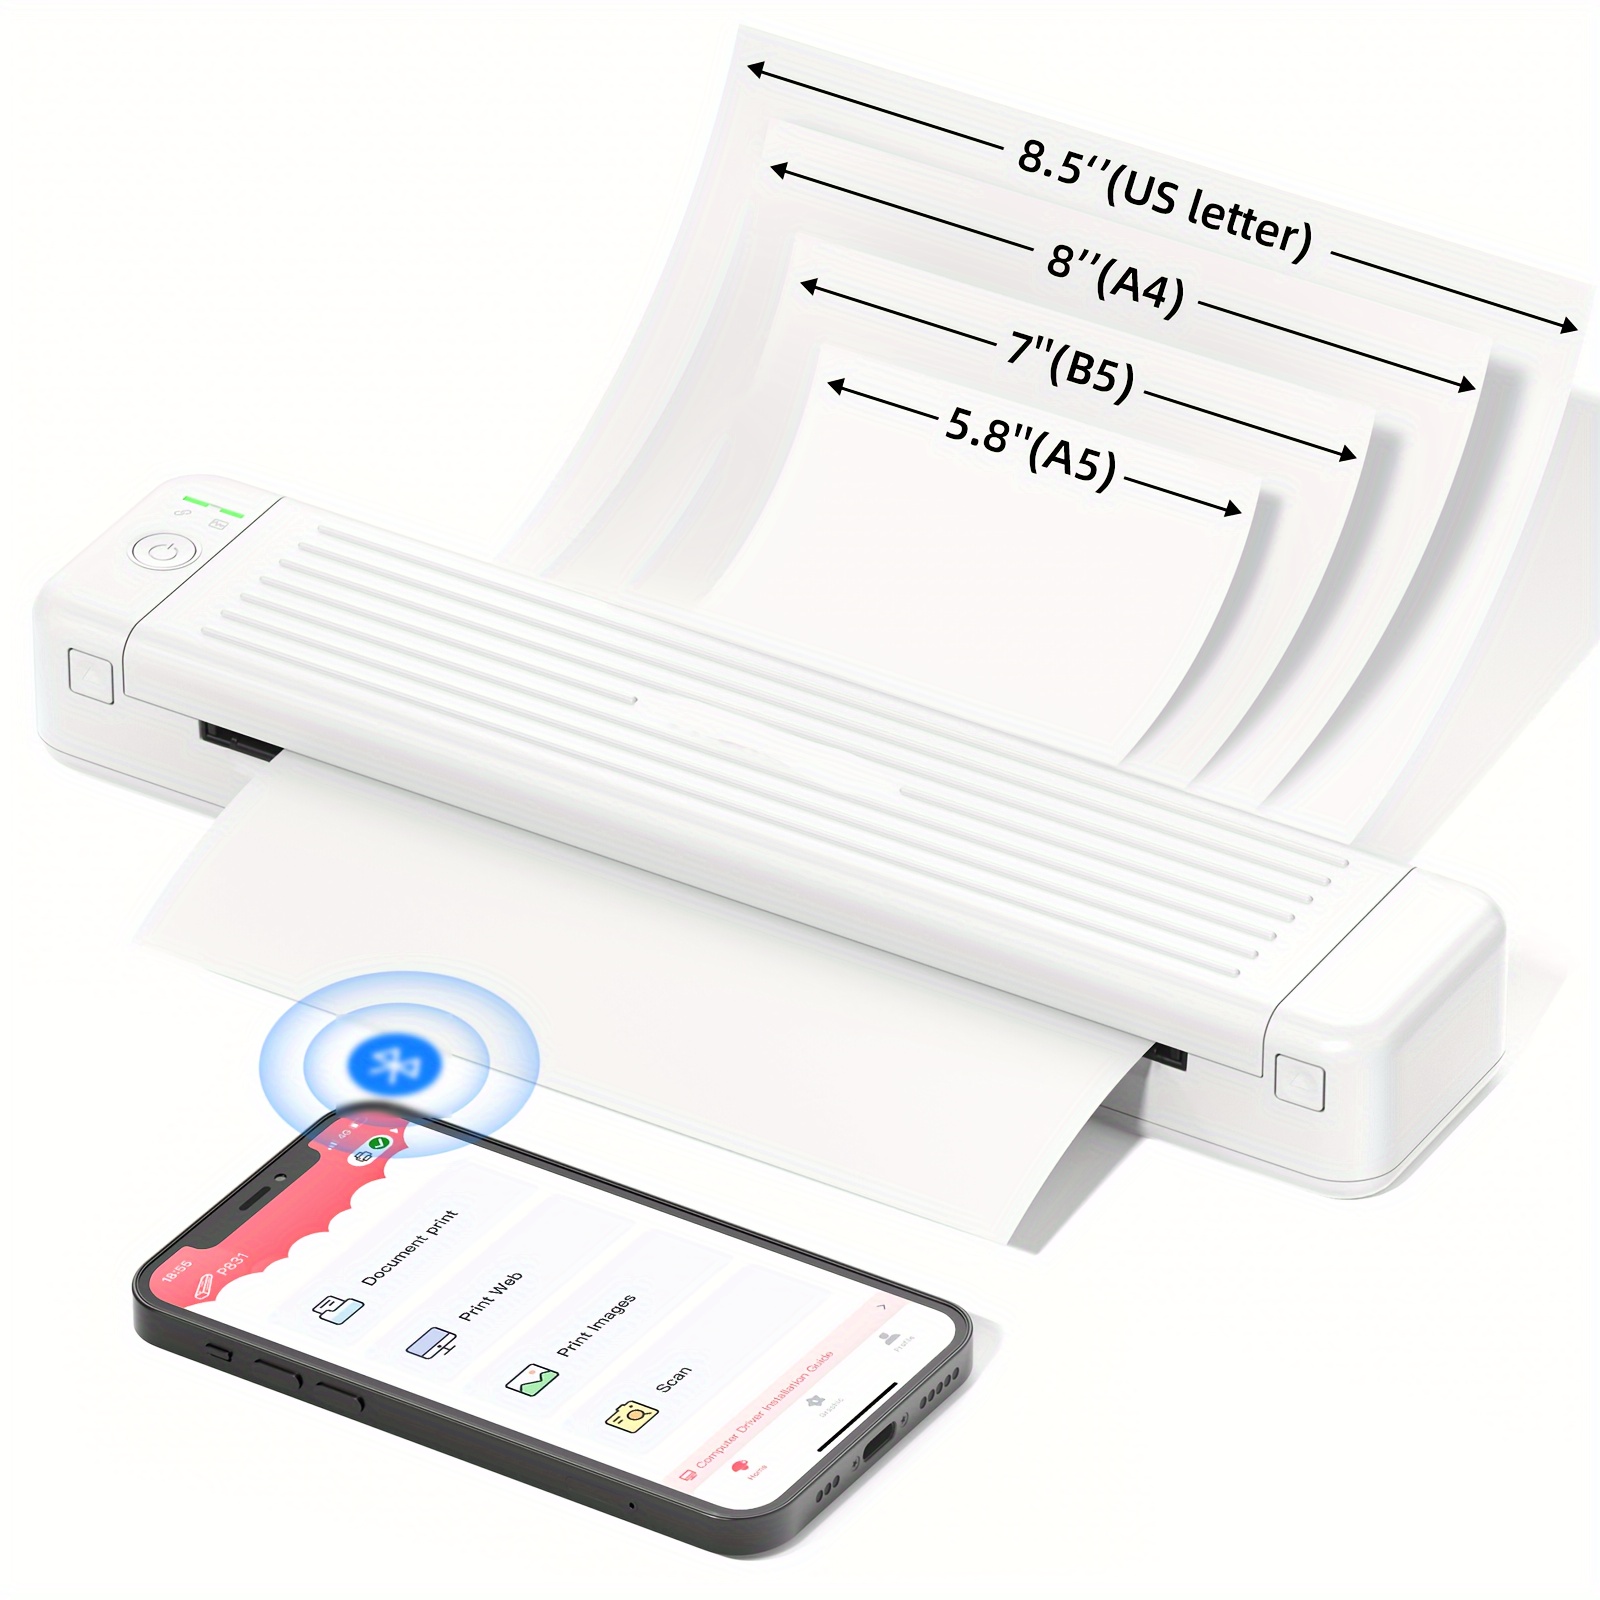  Itari Portable Printer Wireless for Travel - Bluetooth Printer  for Phone, Laptop, Inkless Thermal Compact Printer for Vehicle Home Use  School Office, Support 2''/3''/4''/A4/8.5''x 11'' Paper, 300Dpi : Office  Products